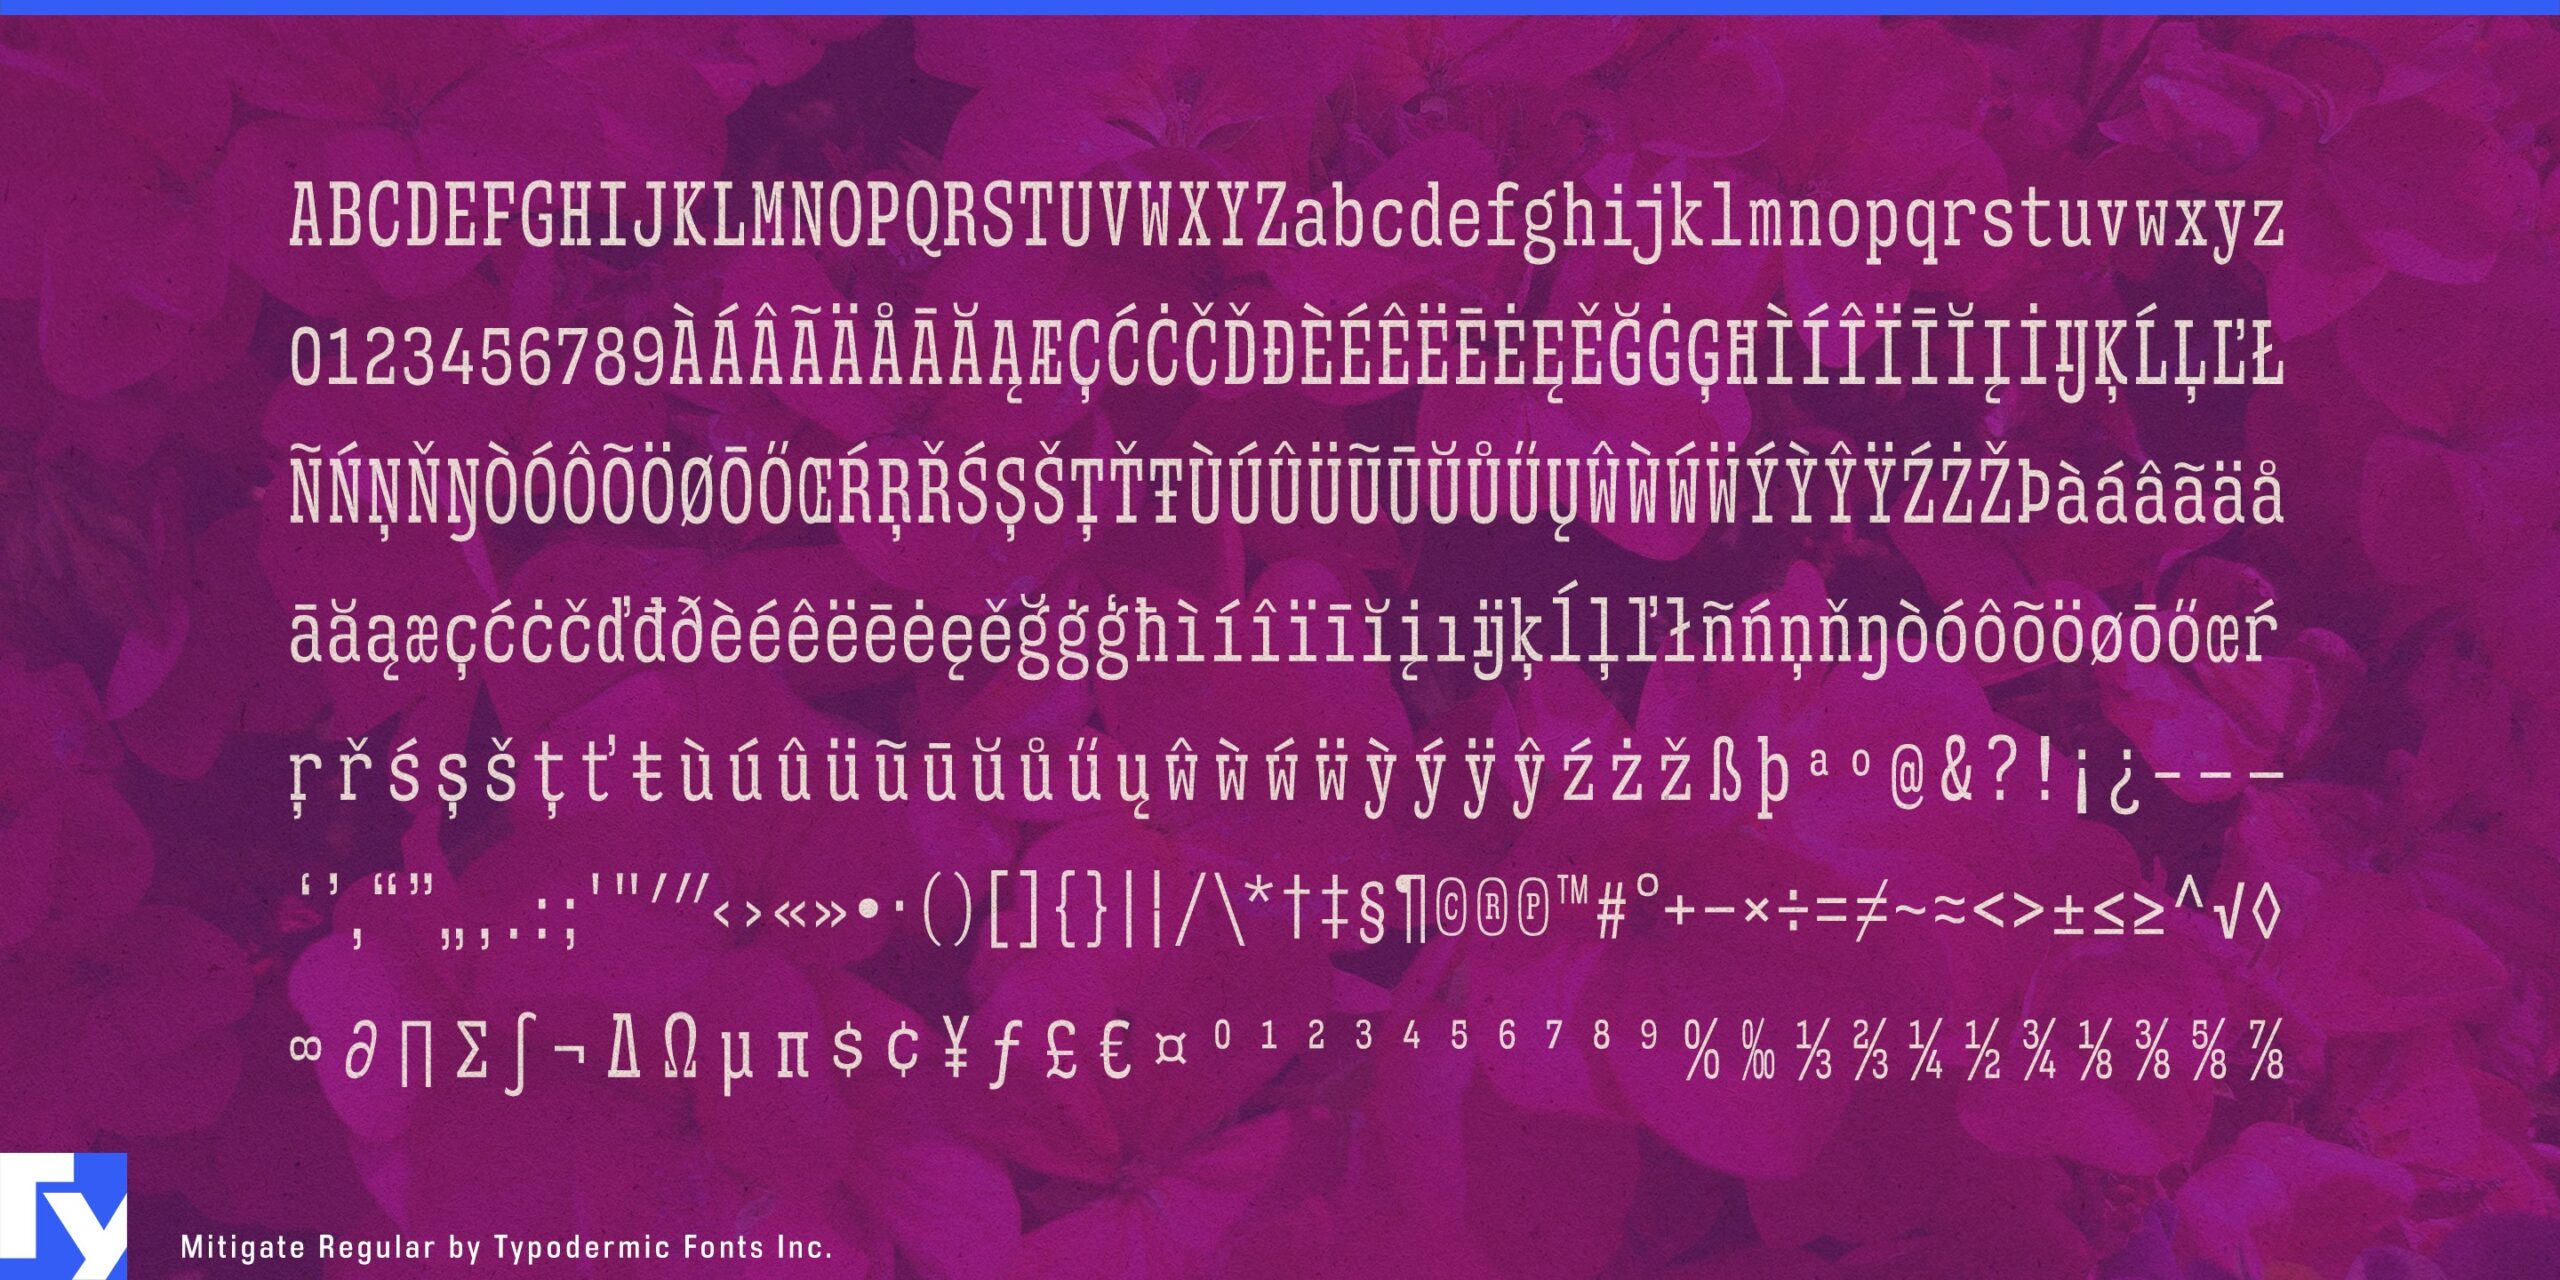 Stand Out from the Crowd with Mitigate: The Typeface for Attention-Grabbing Text